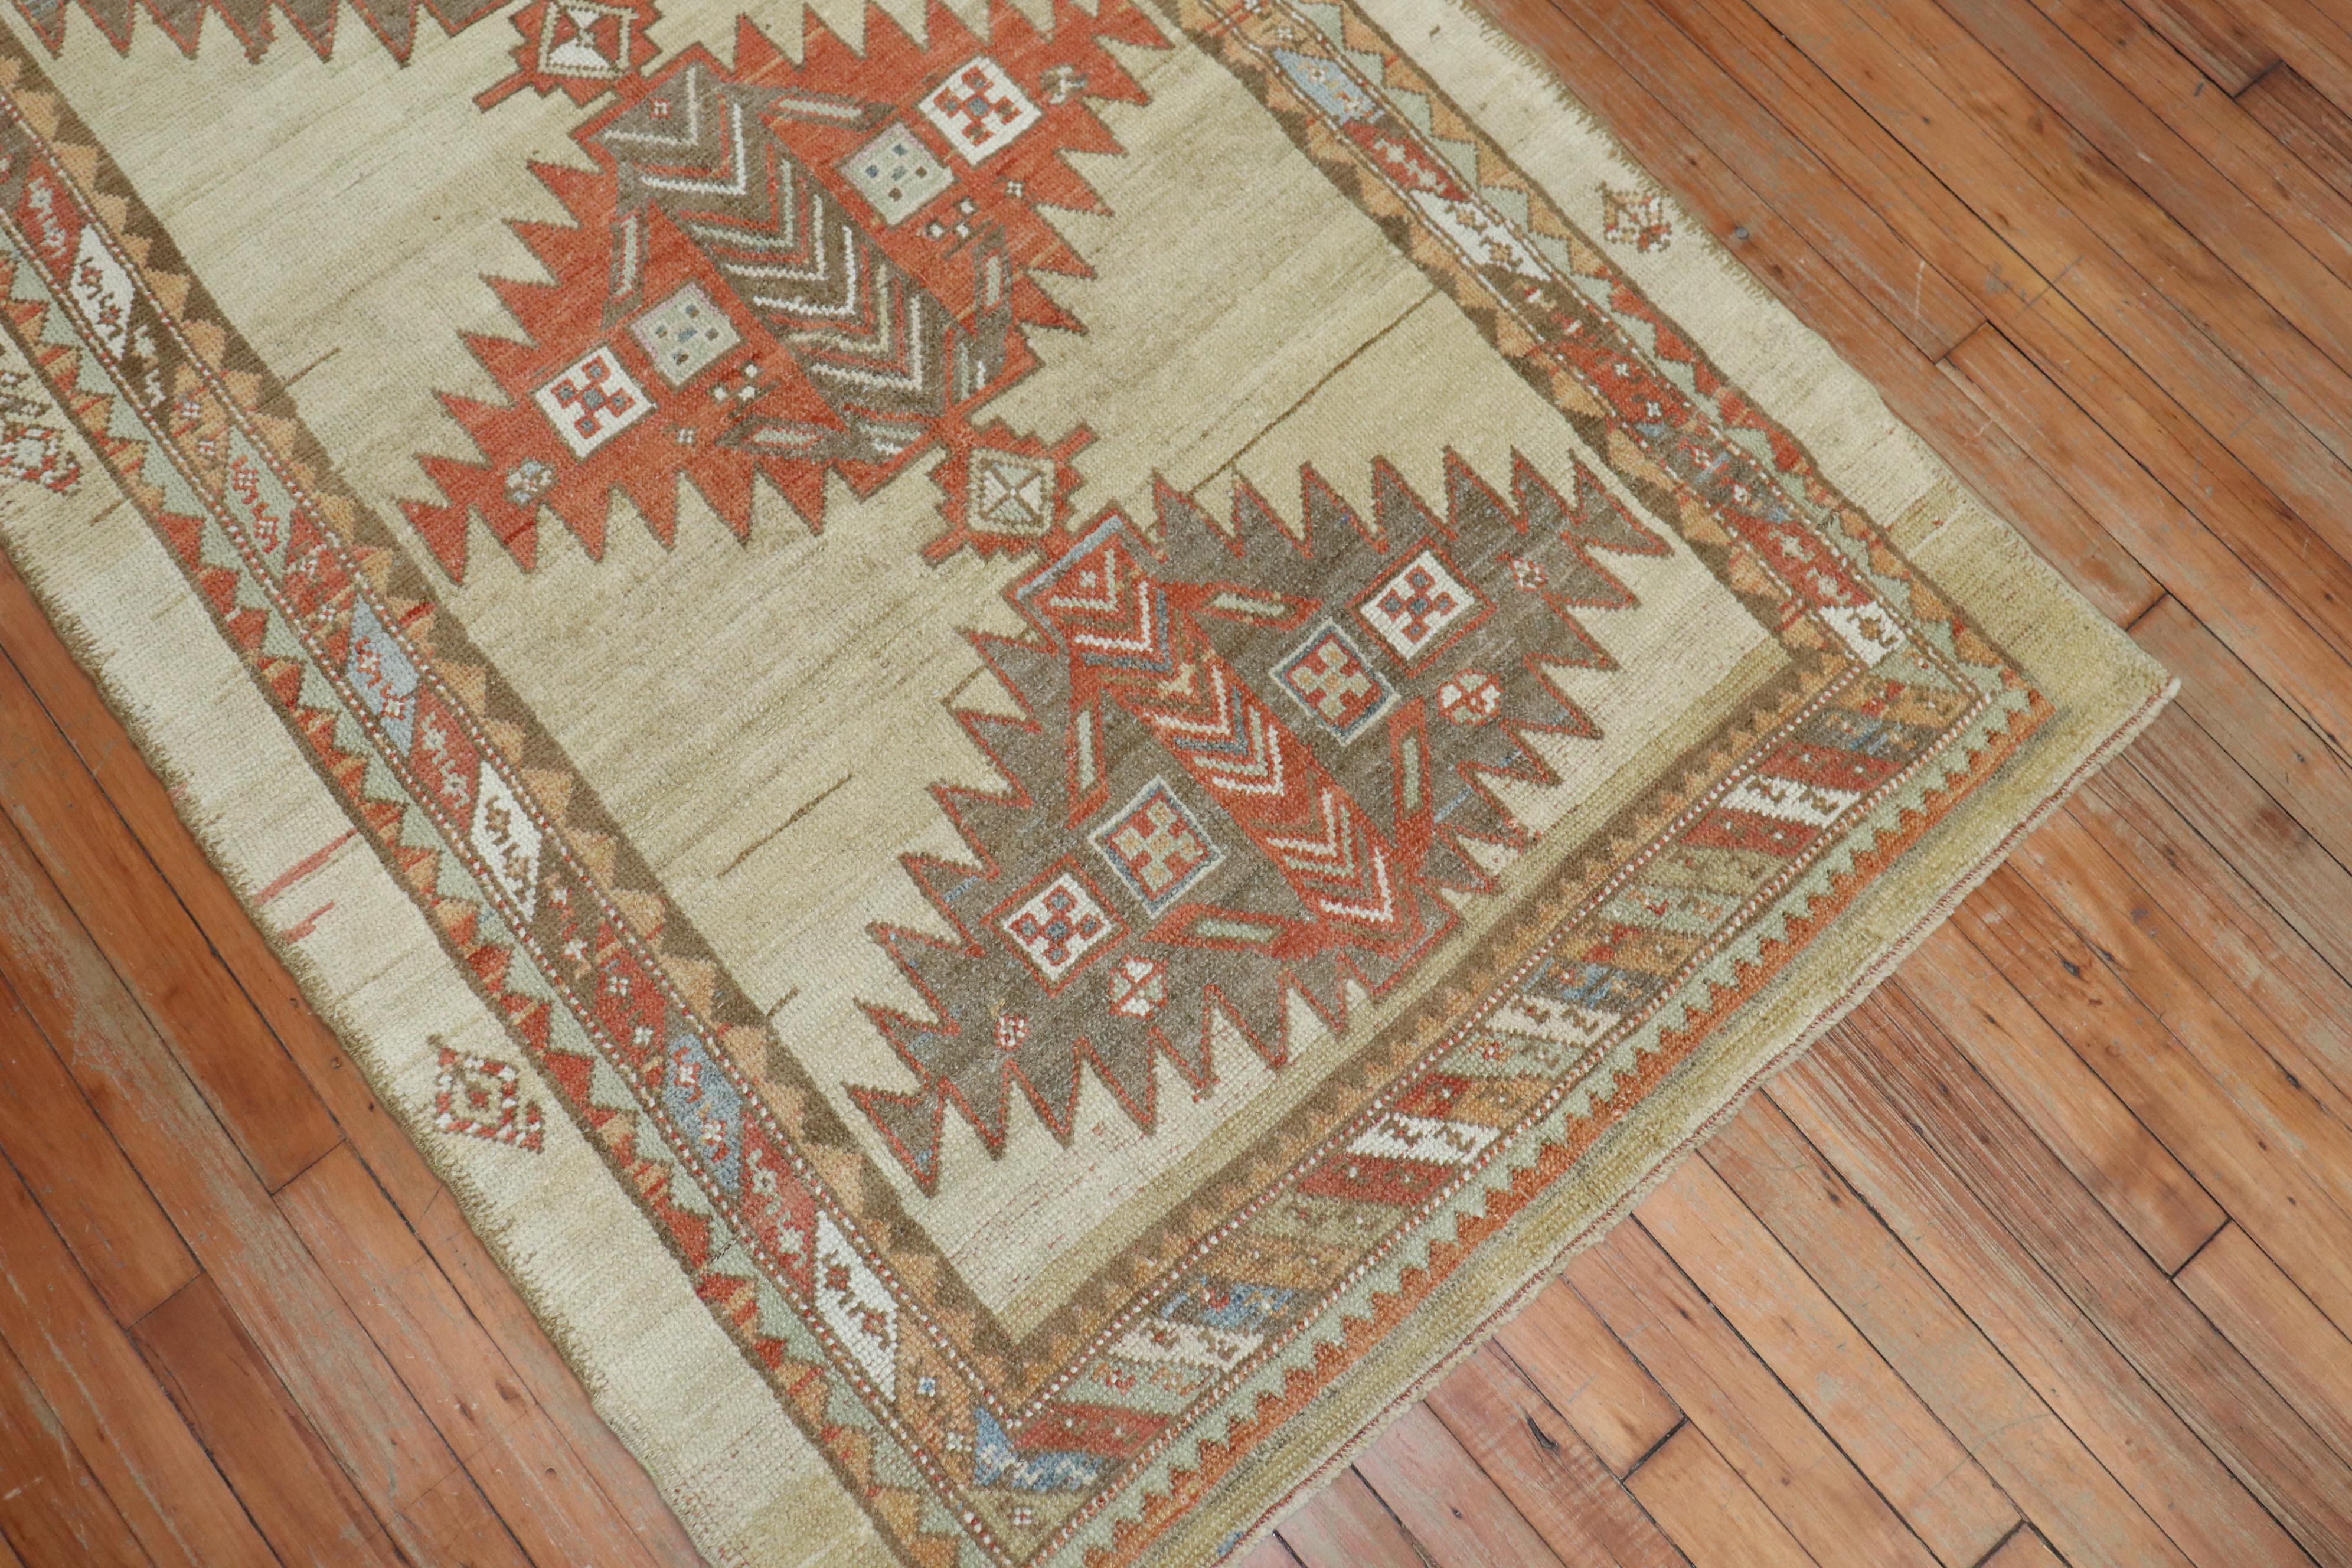 An early 20th century Persian Serab rug with a large scale tribal design on a soft camel colored ground. Accents in brown, terracotta, light blue and rust. The rug has a very soft and casual feel. The Pile is sturdy and can with stand heavy day to